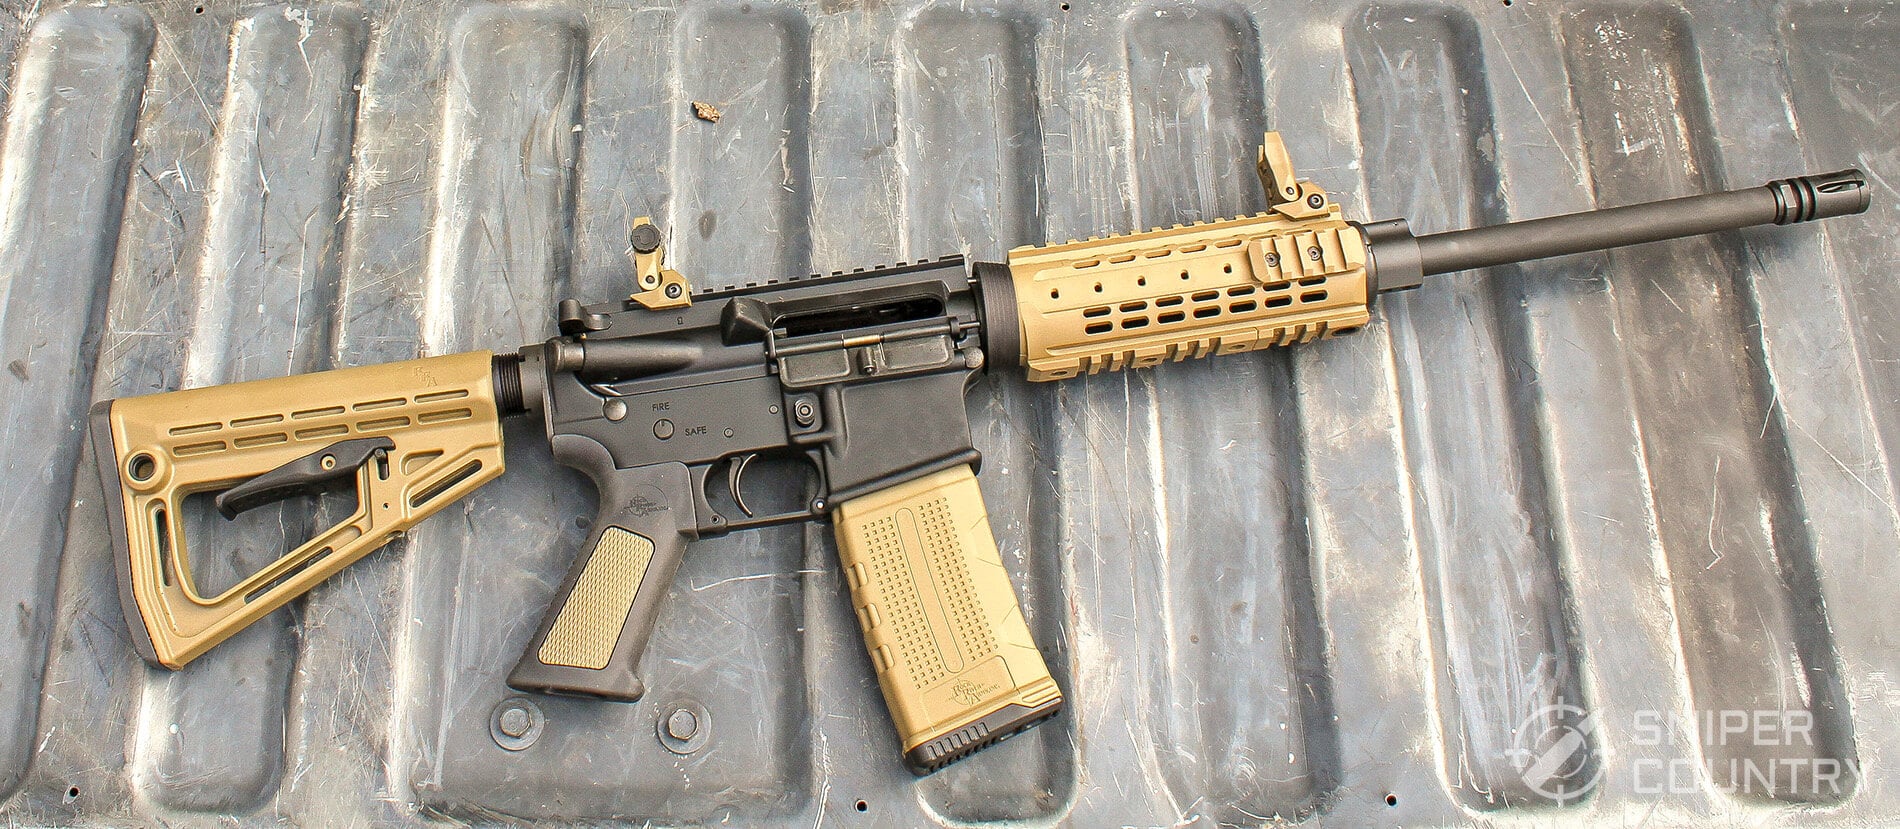 Cleaning Your BCG: Keep Your AR Running - The Armory Life